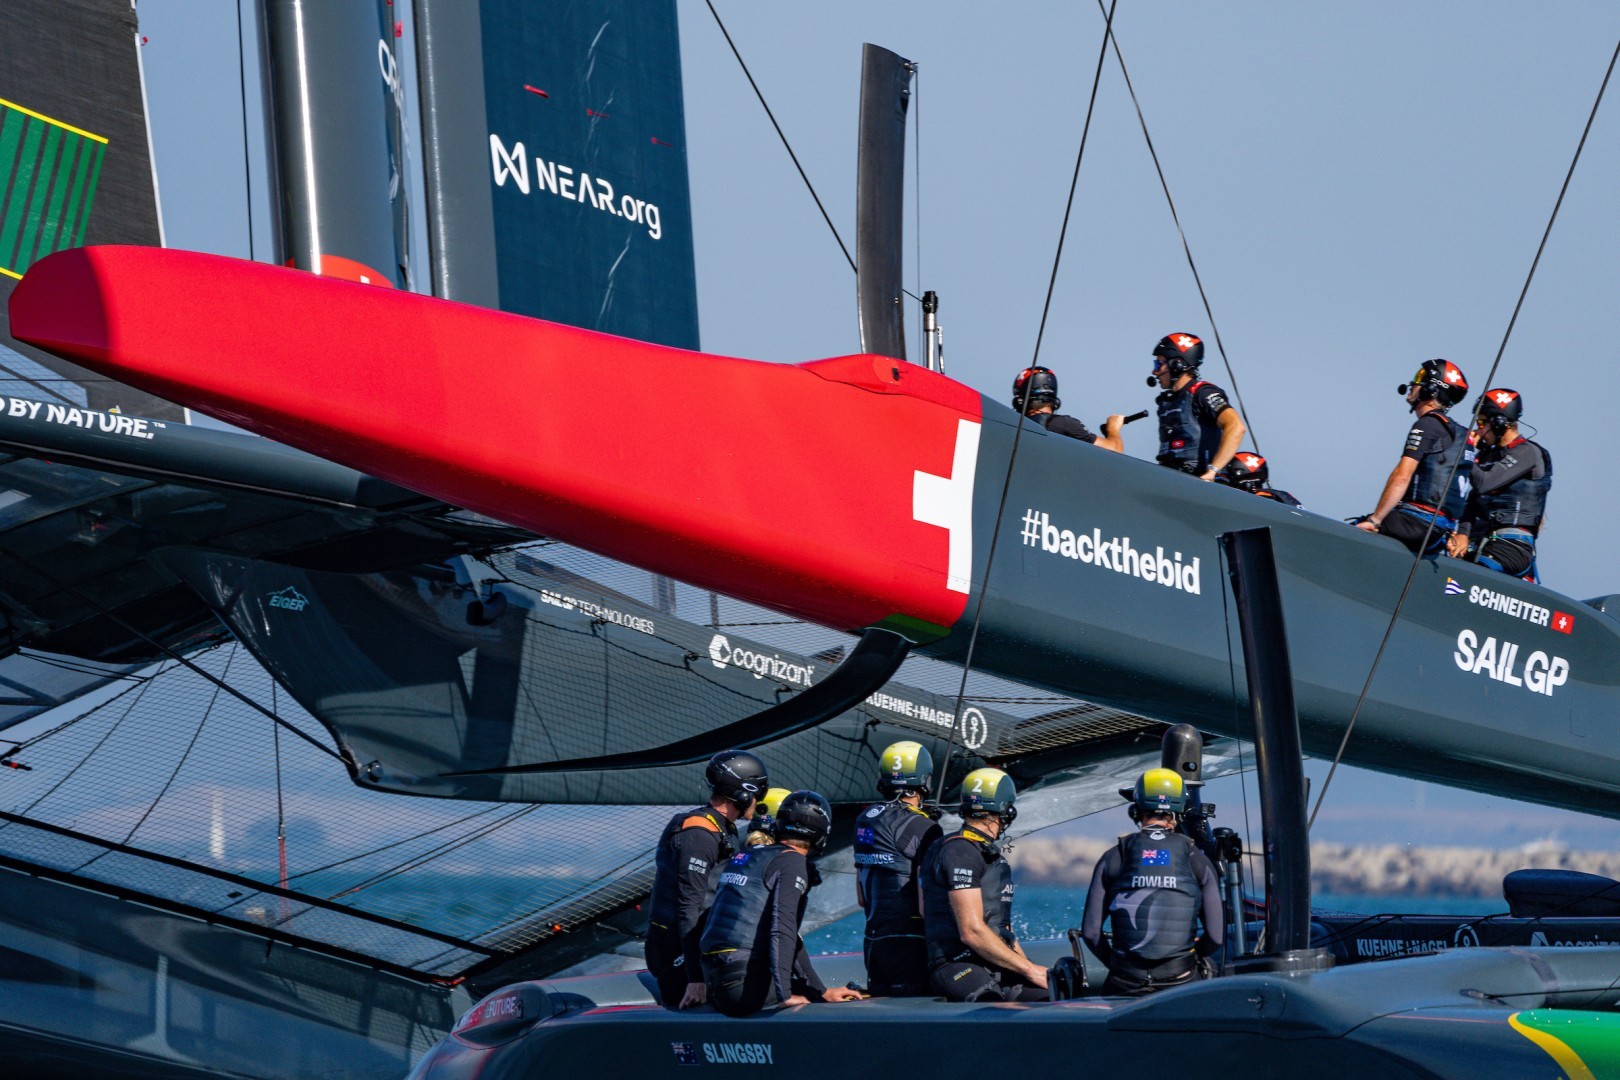 Resurgent United States SailGP Team looks to challenge league leaders Australia and New Zealand alongside inspired home team Spain in Andalucía